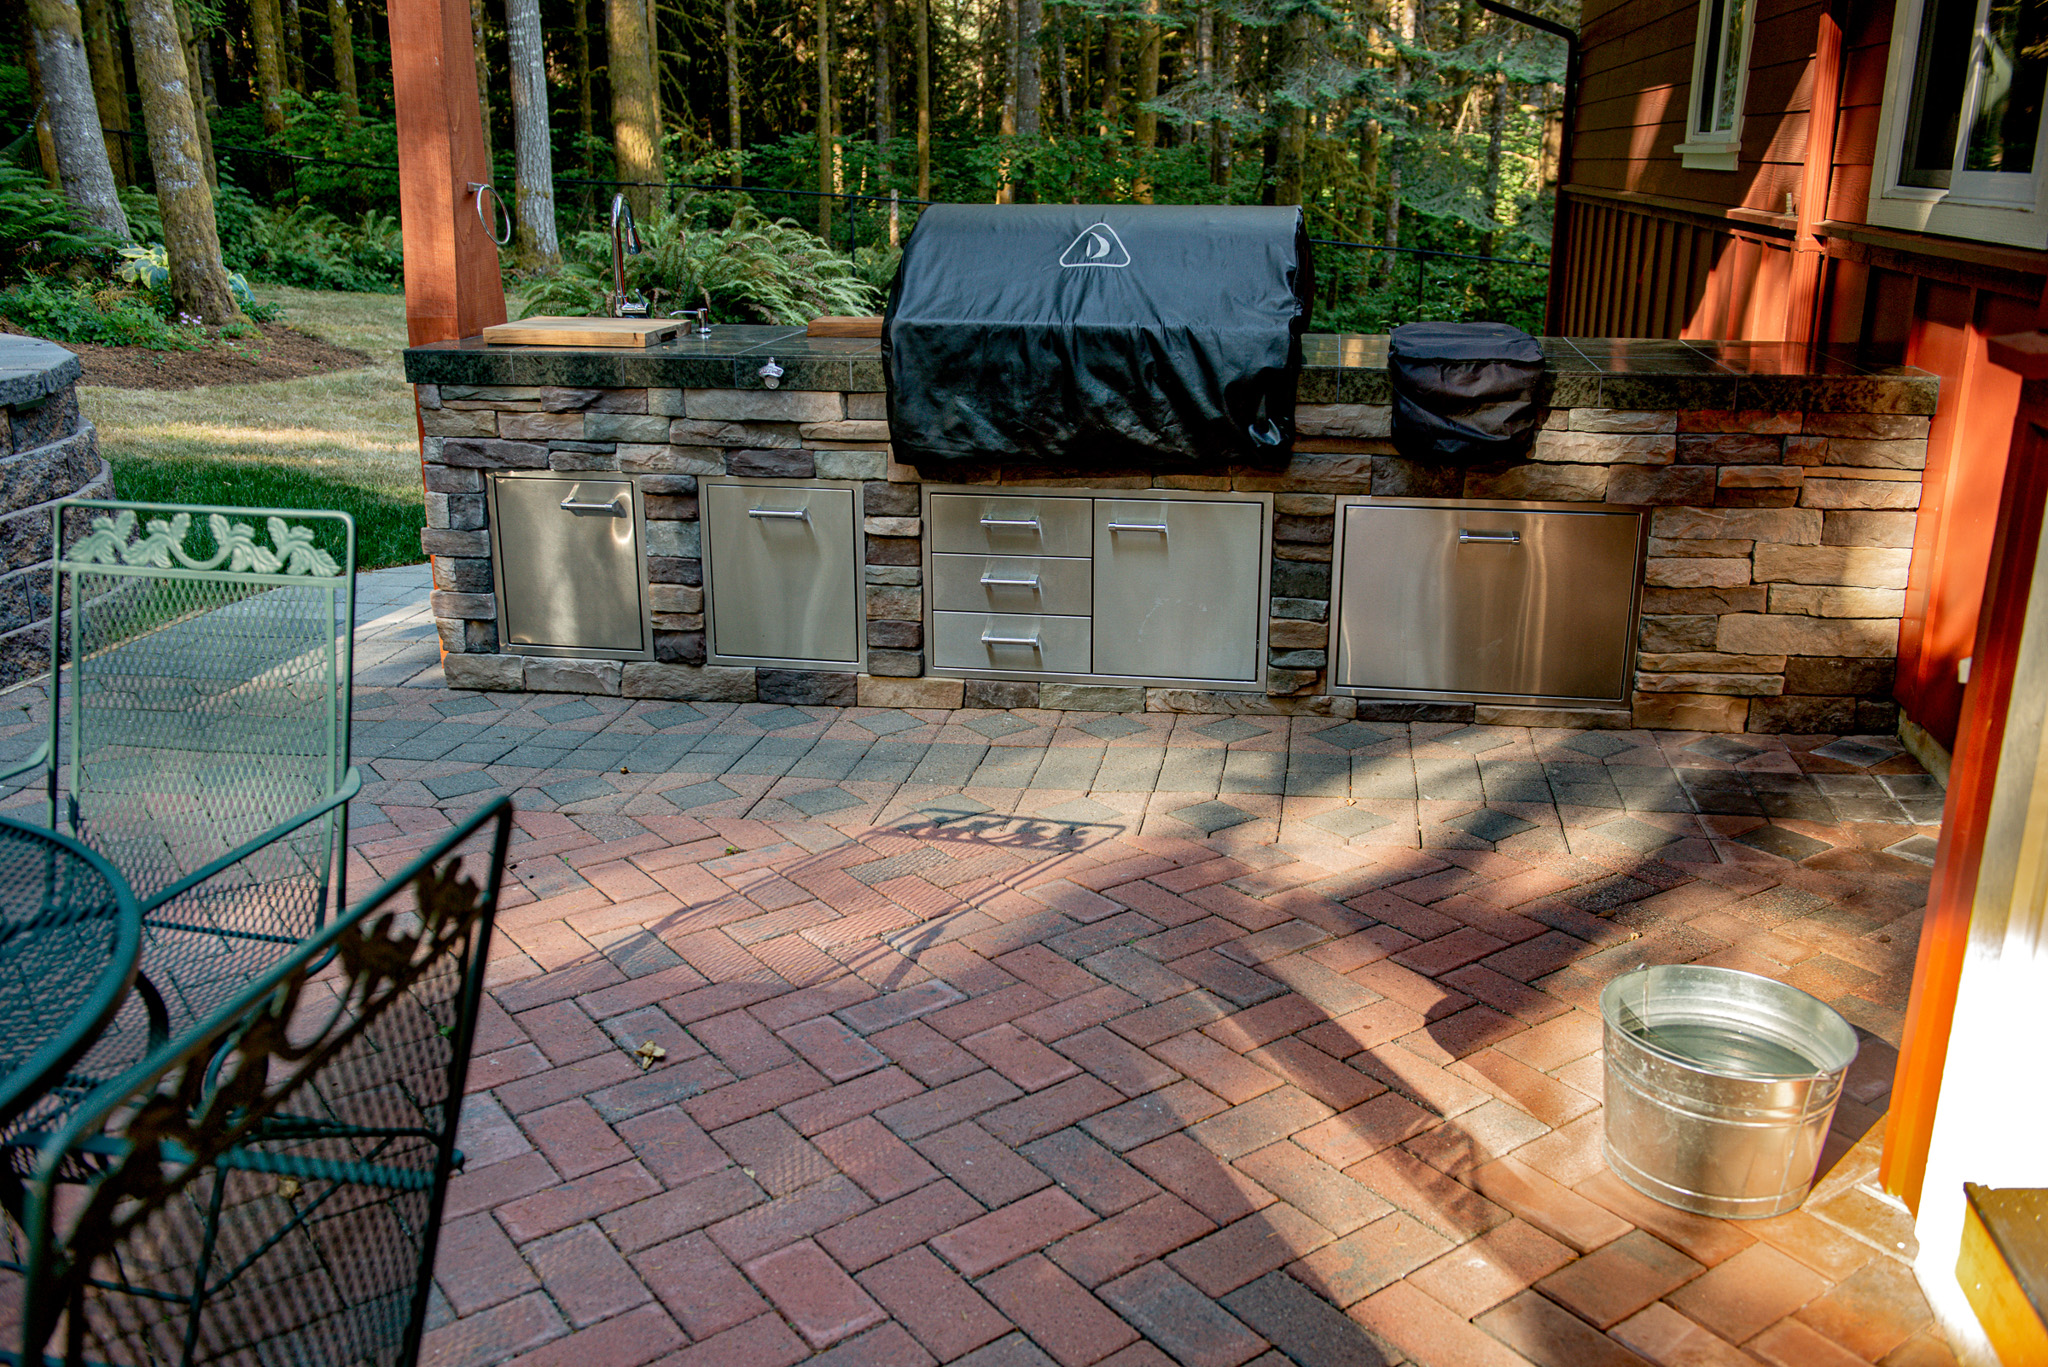 Outdoor kitchen faced with Cultured Stone on a paver patio